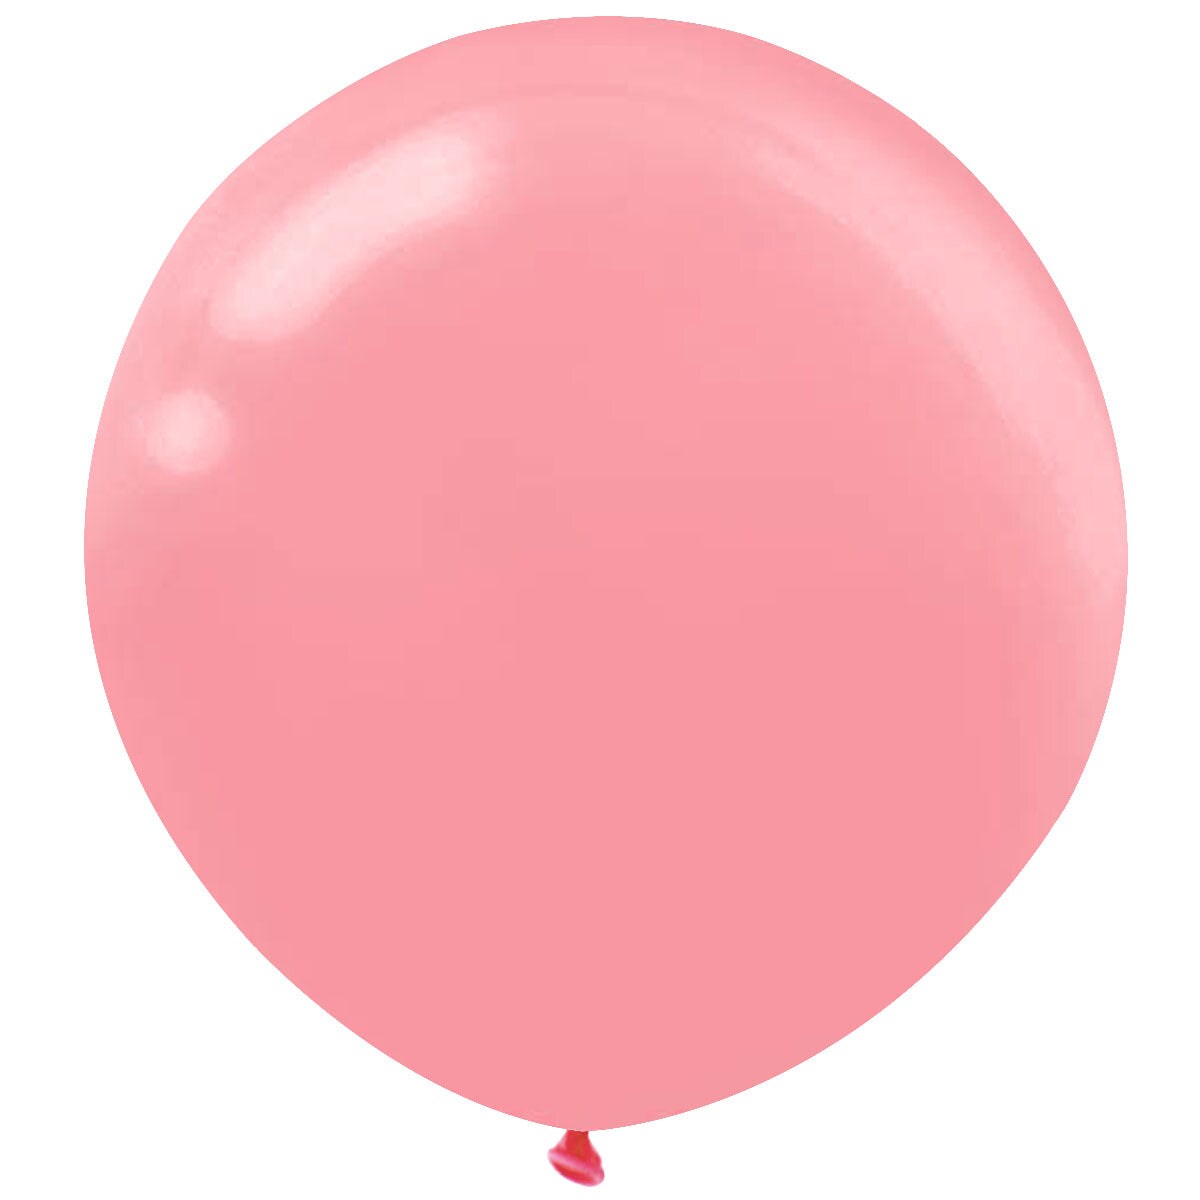 Wrapables 18 Inch Latex Balloons (10 Pack), Bubble Gum Pink